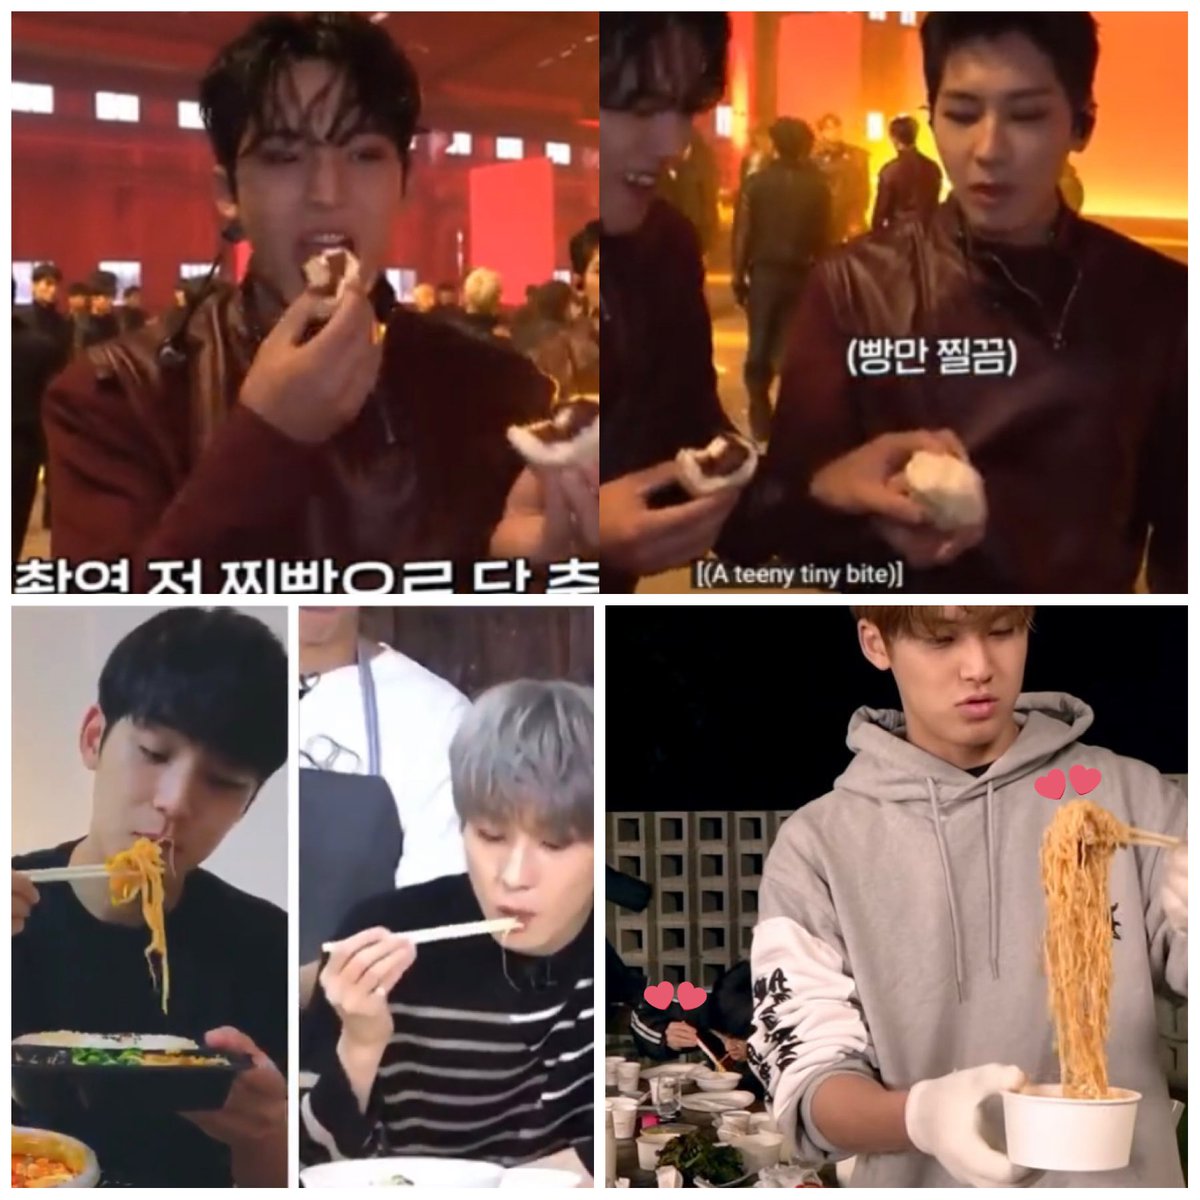 The saga of MinWon bite size difference continues… 
- steamed buns
- beansprouts
- ramyeon